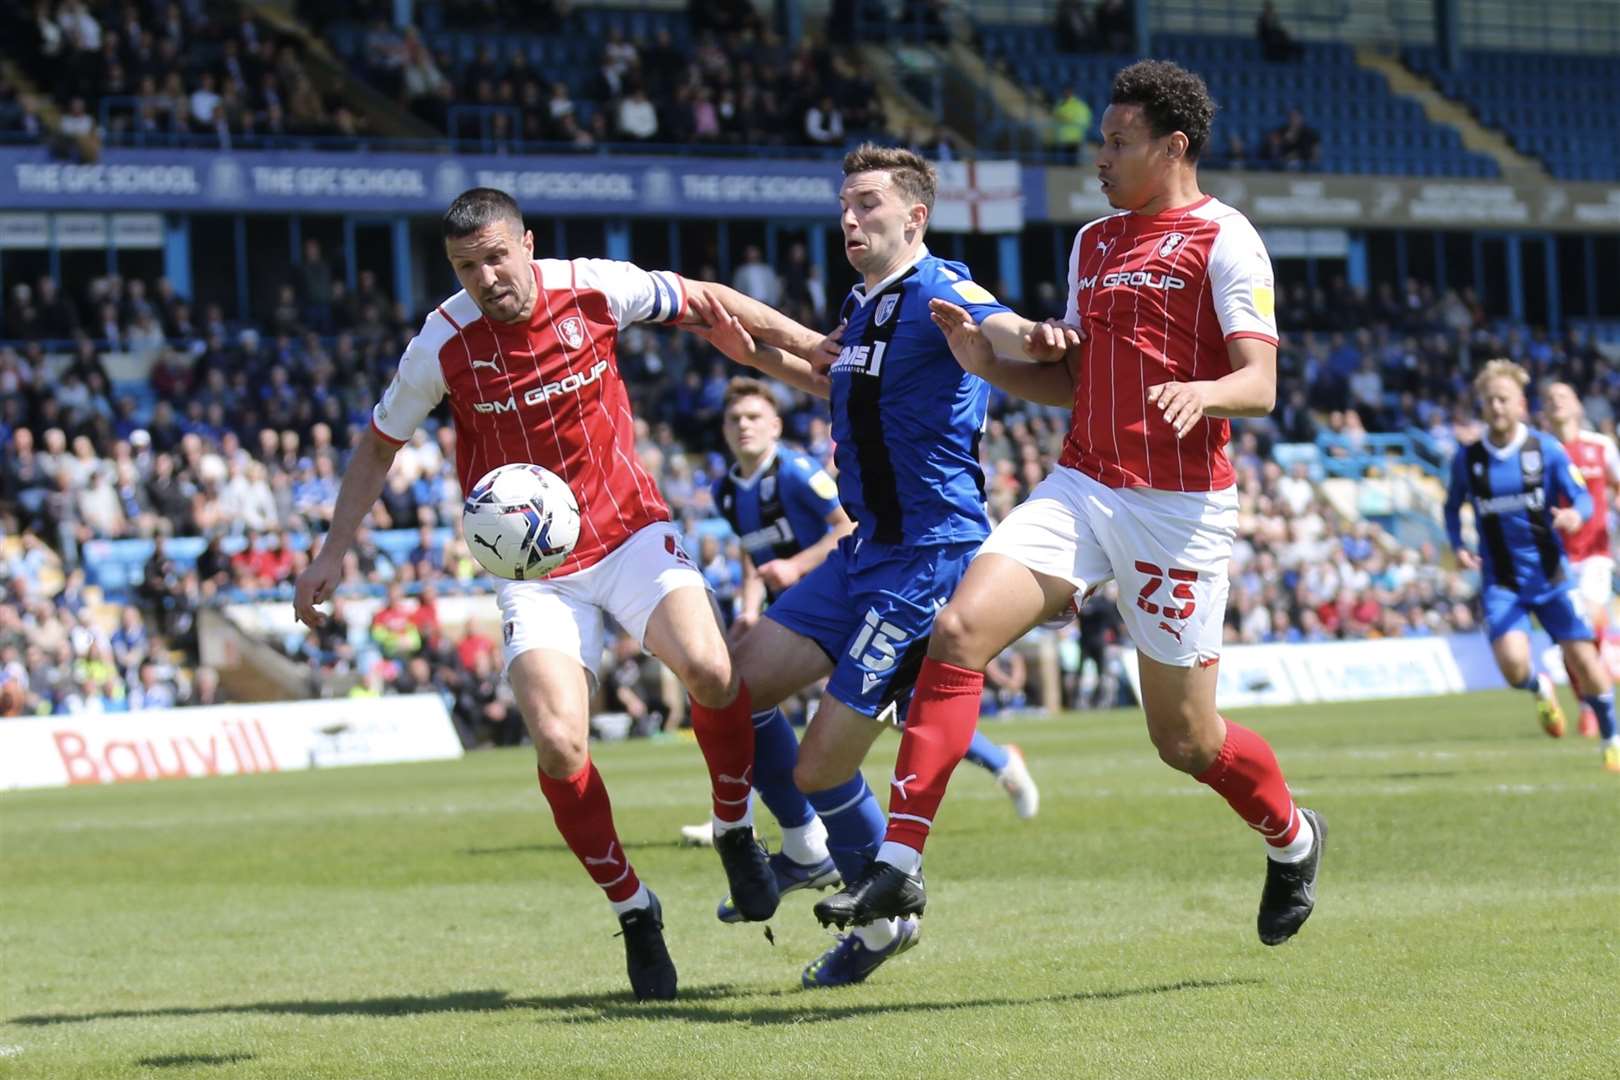 Gillingham battle Rotherham in vain, losing 2-0 to drop into League 2